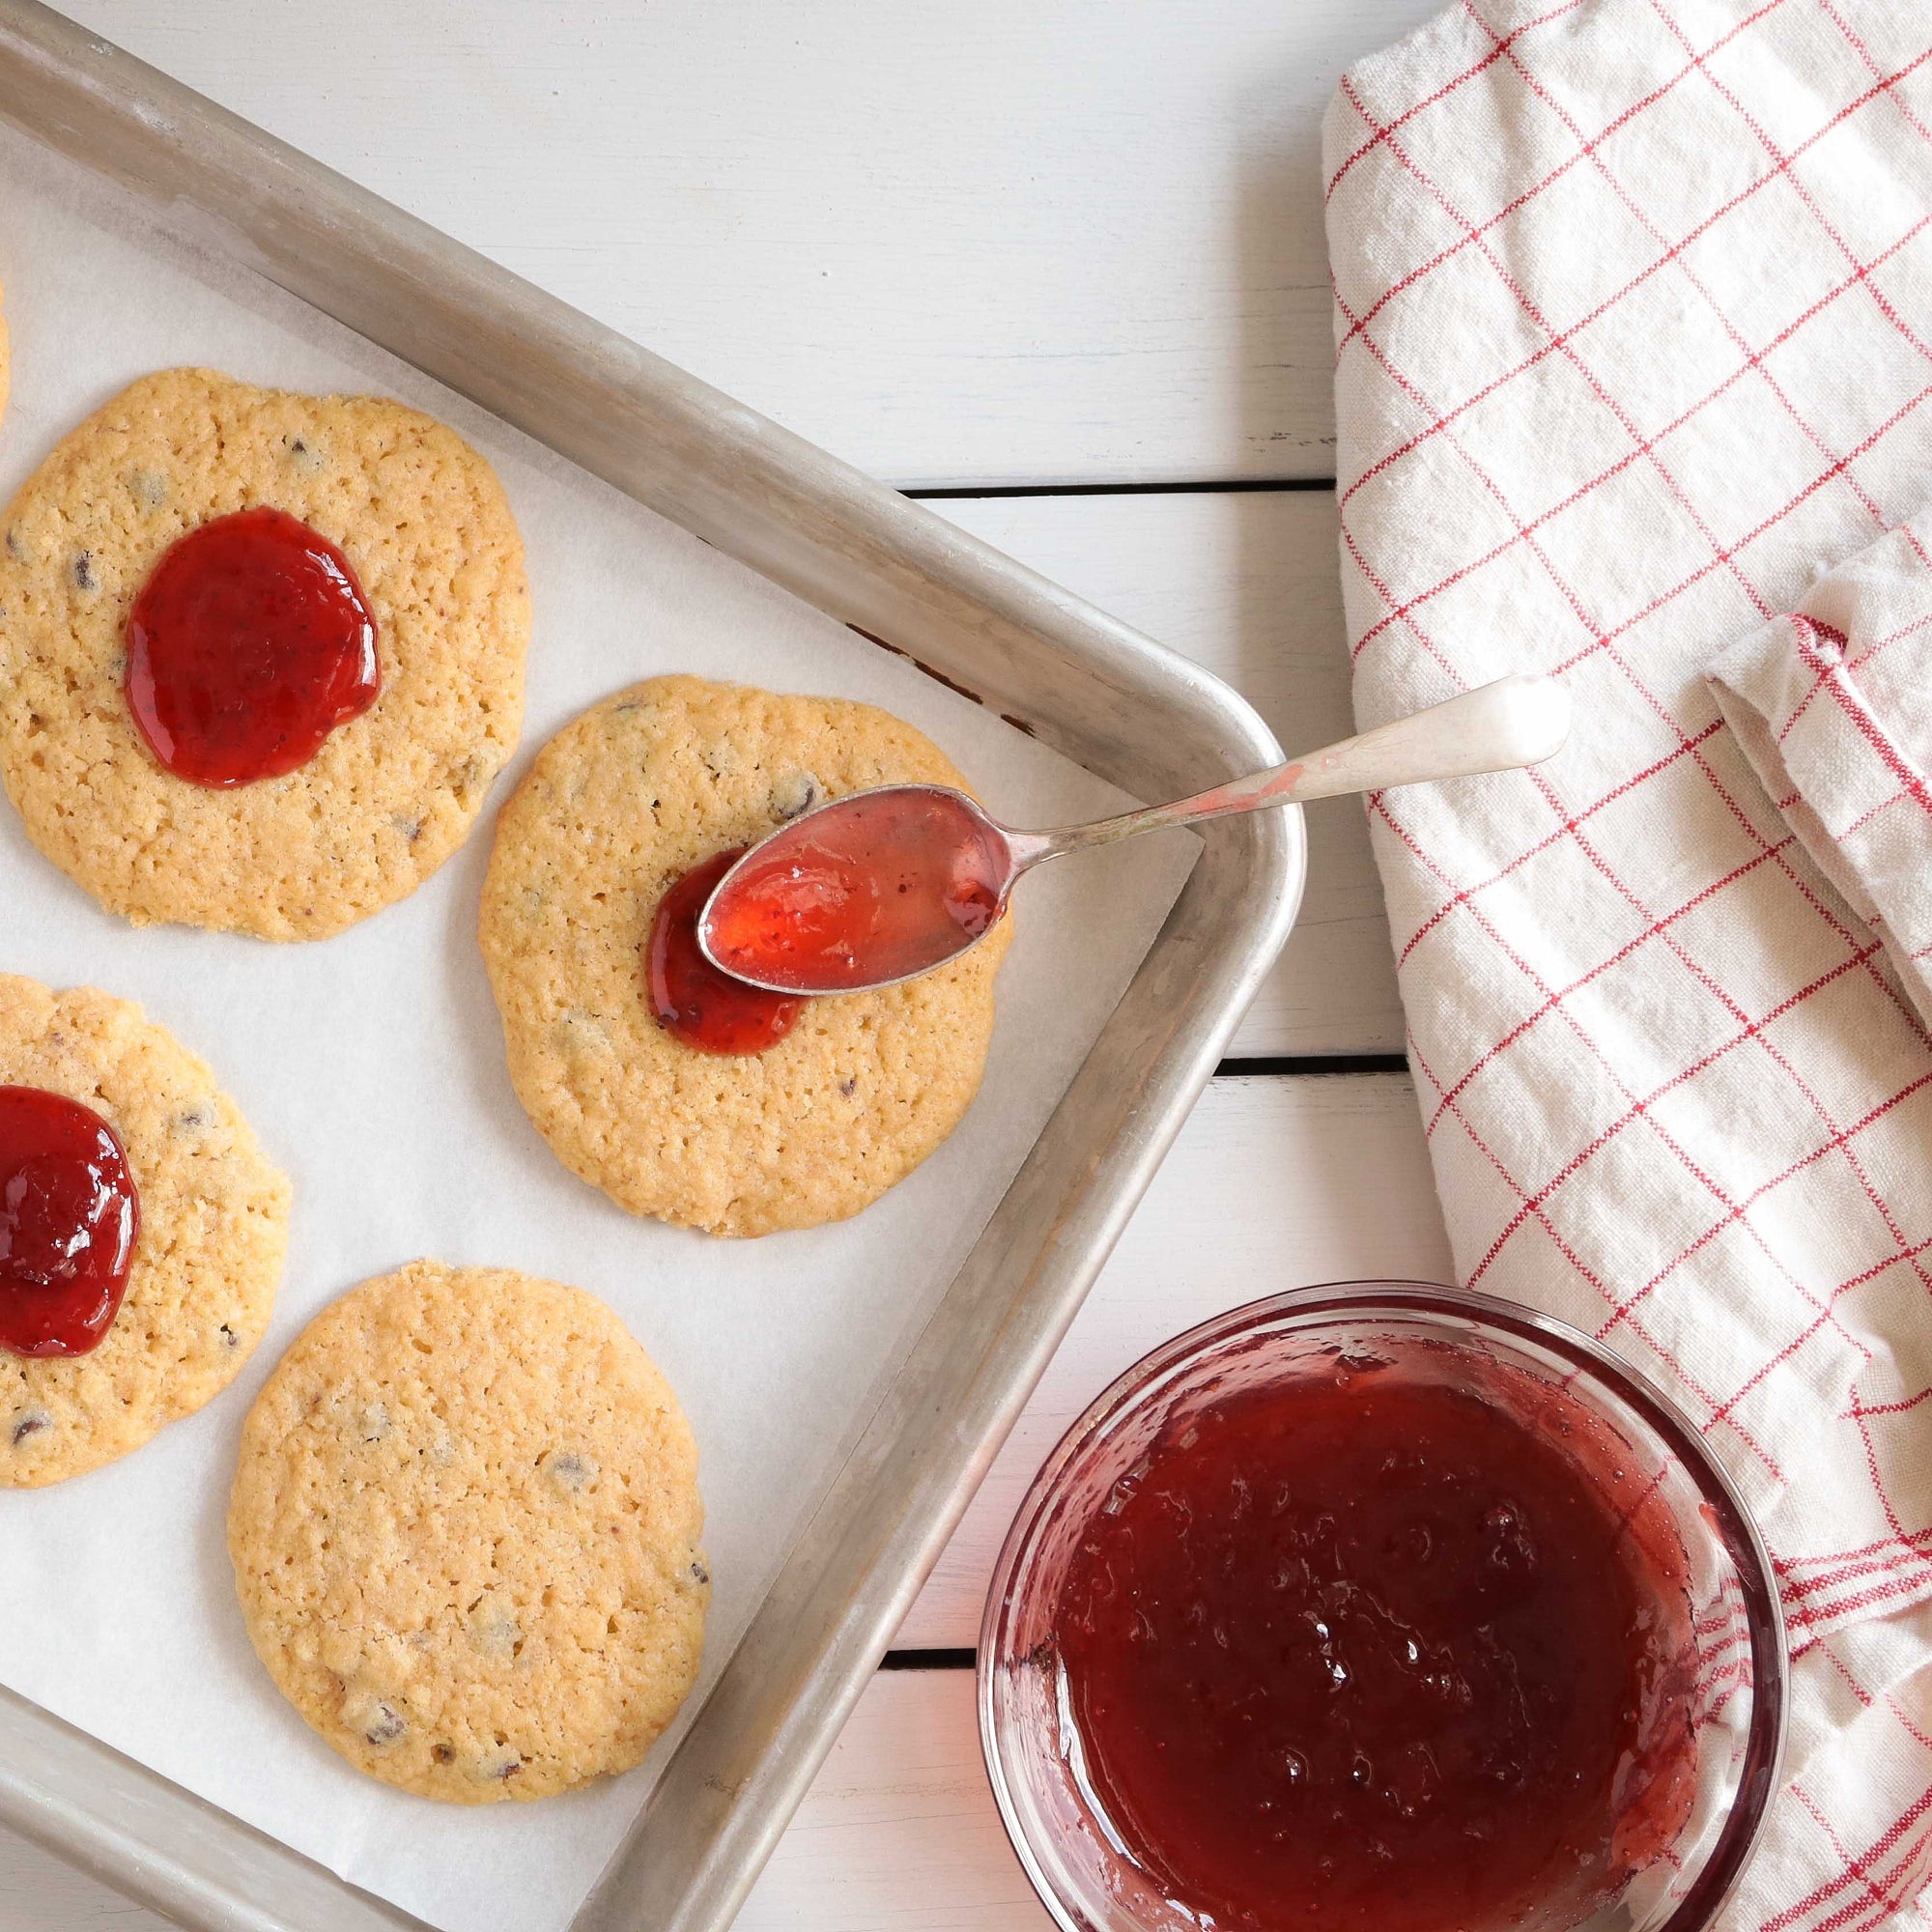 Peanut Butter & Jelly Cookies